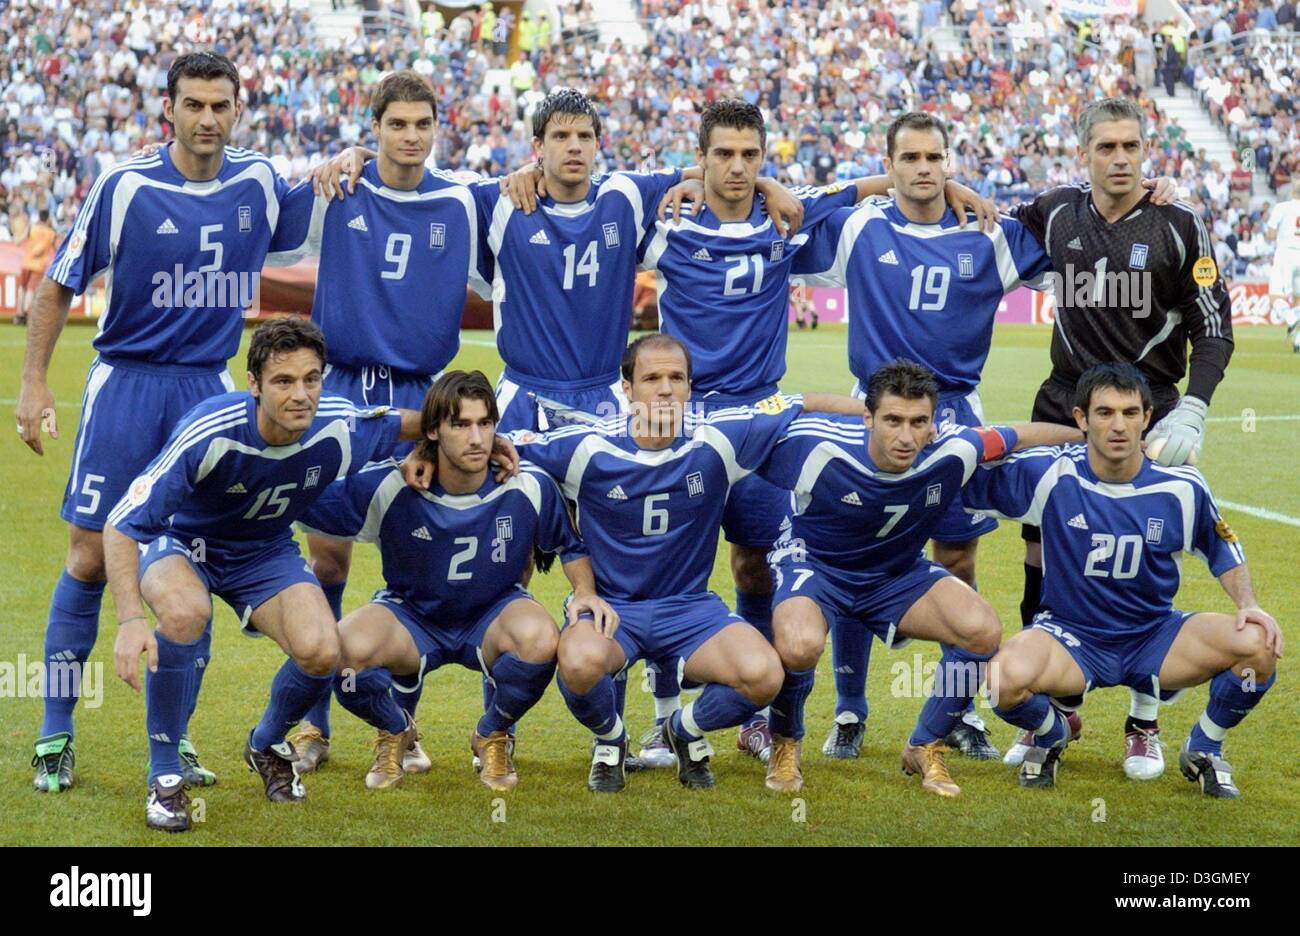 (dpa) - The players of the Greek national soccer team stand together for a group picture ahead of the Soccer Euro 2004 semifinal opposing Greece and the Czech Republic in Porto, Portugal, 01 July 2004.  (From L, back)  Traianos Dellas, Angelos Charisteas, Panagiotis Fyssas, Konstantinos Katsouranis, Mihalis Kapsis, Antonios Nikopolidis. (From L, front) Zisis Vryzas, Georgios Seitar Stock Photo